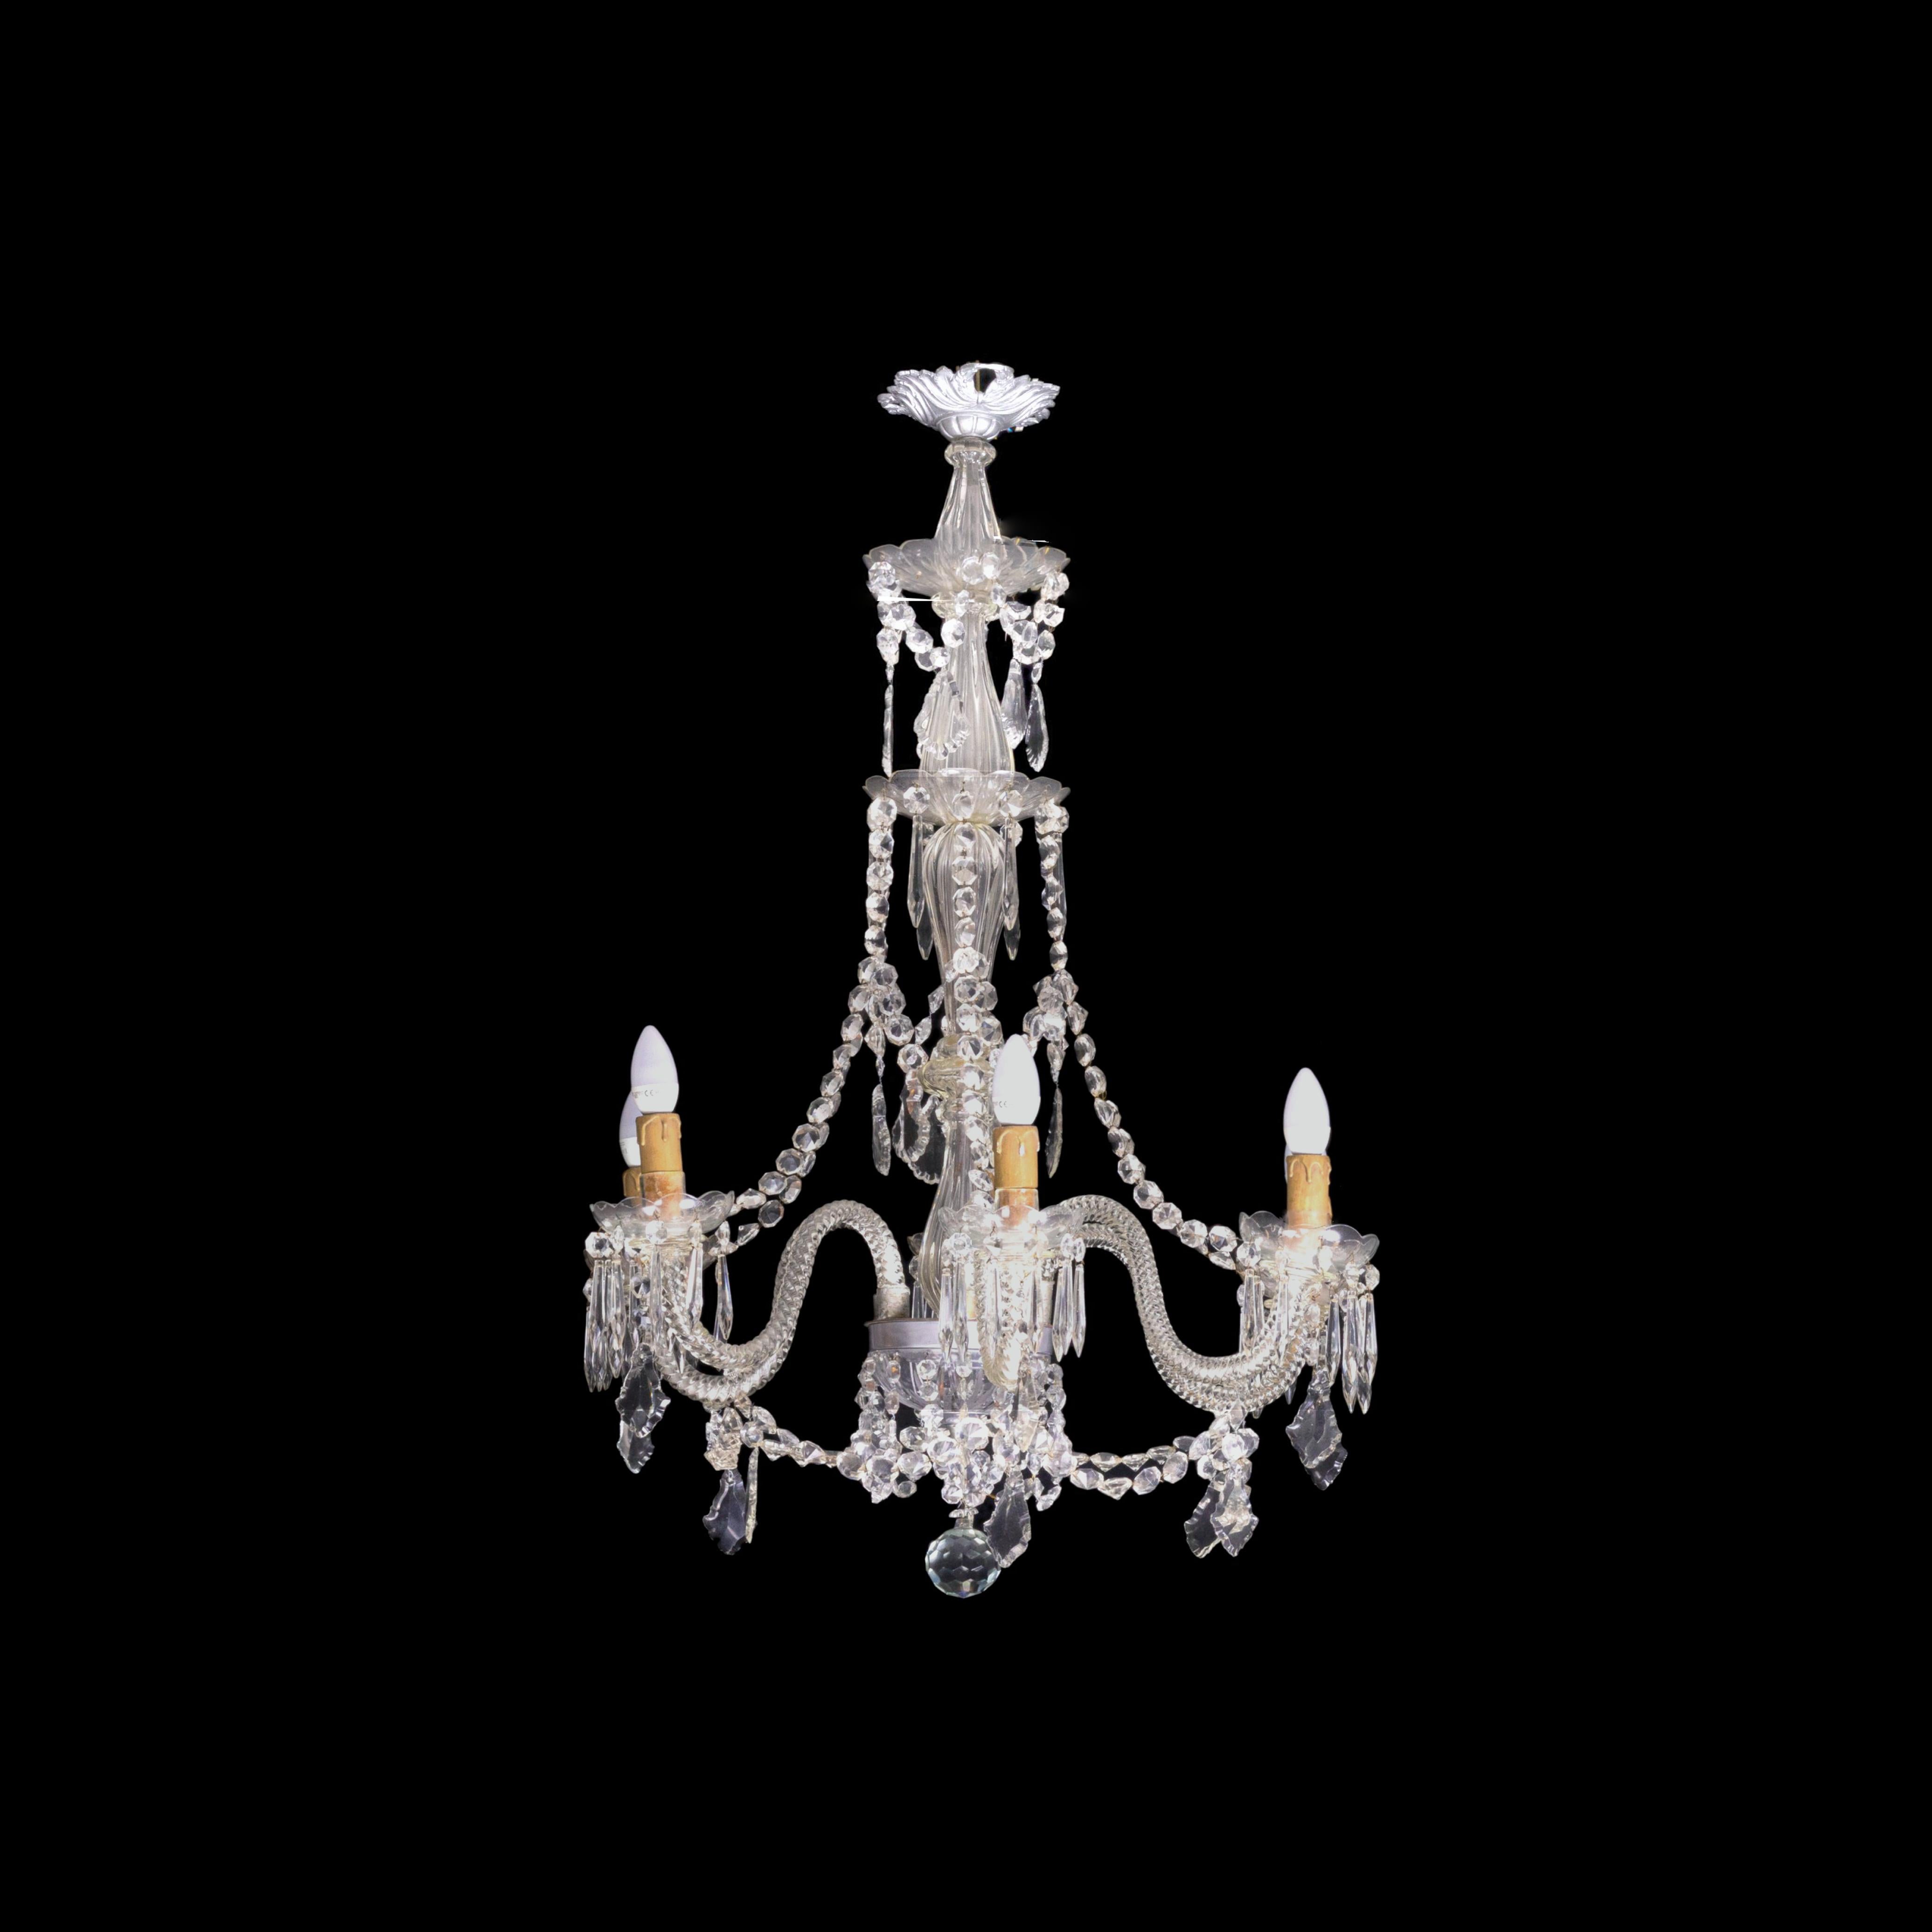 This exquisite chandelier lamp showcases the elegance of Murano style with its six arms, bronze structure, and stunning crystals and pendant glass. It has been recently reviewed and is in perfect working condition. Rest assured, the lamp will be